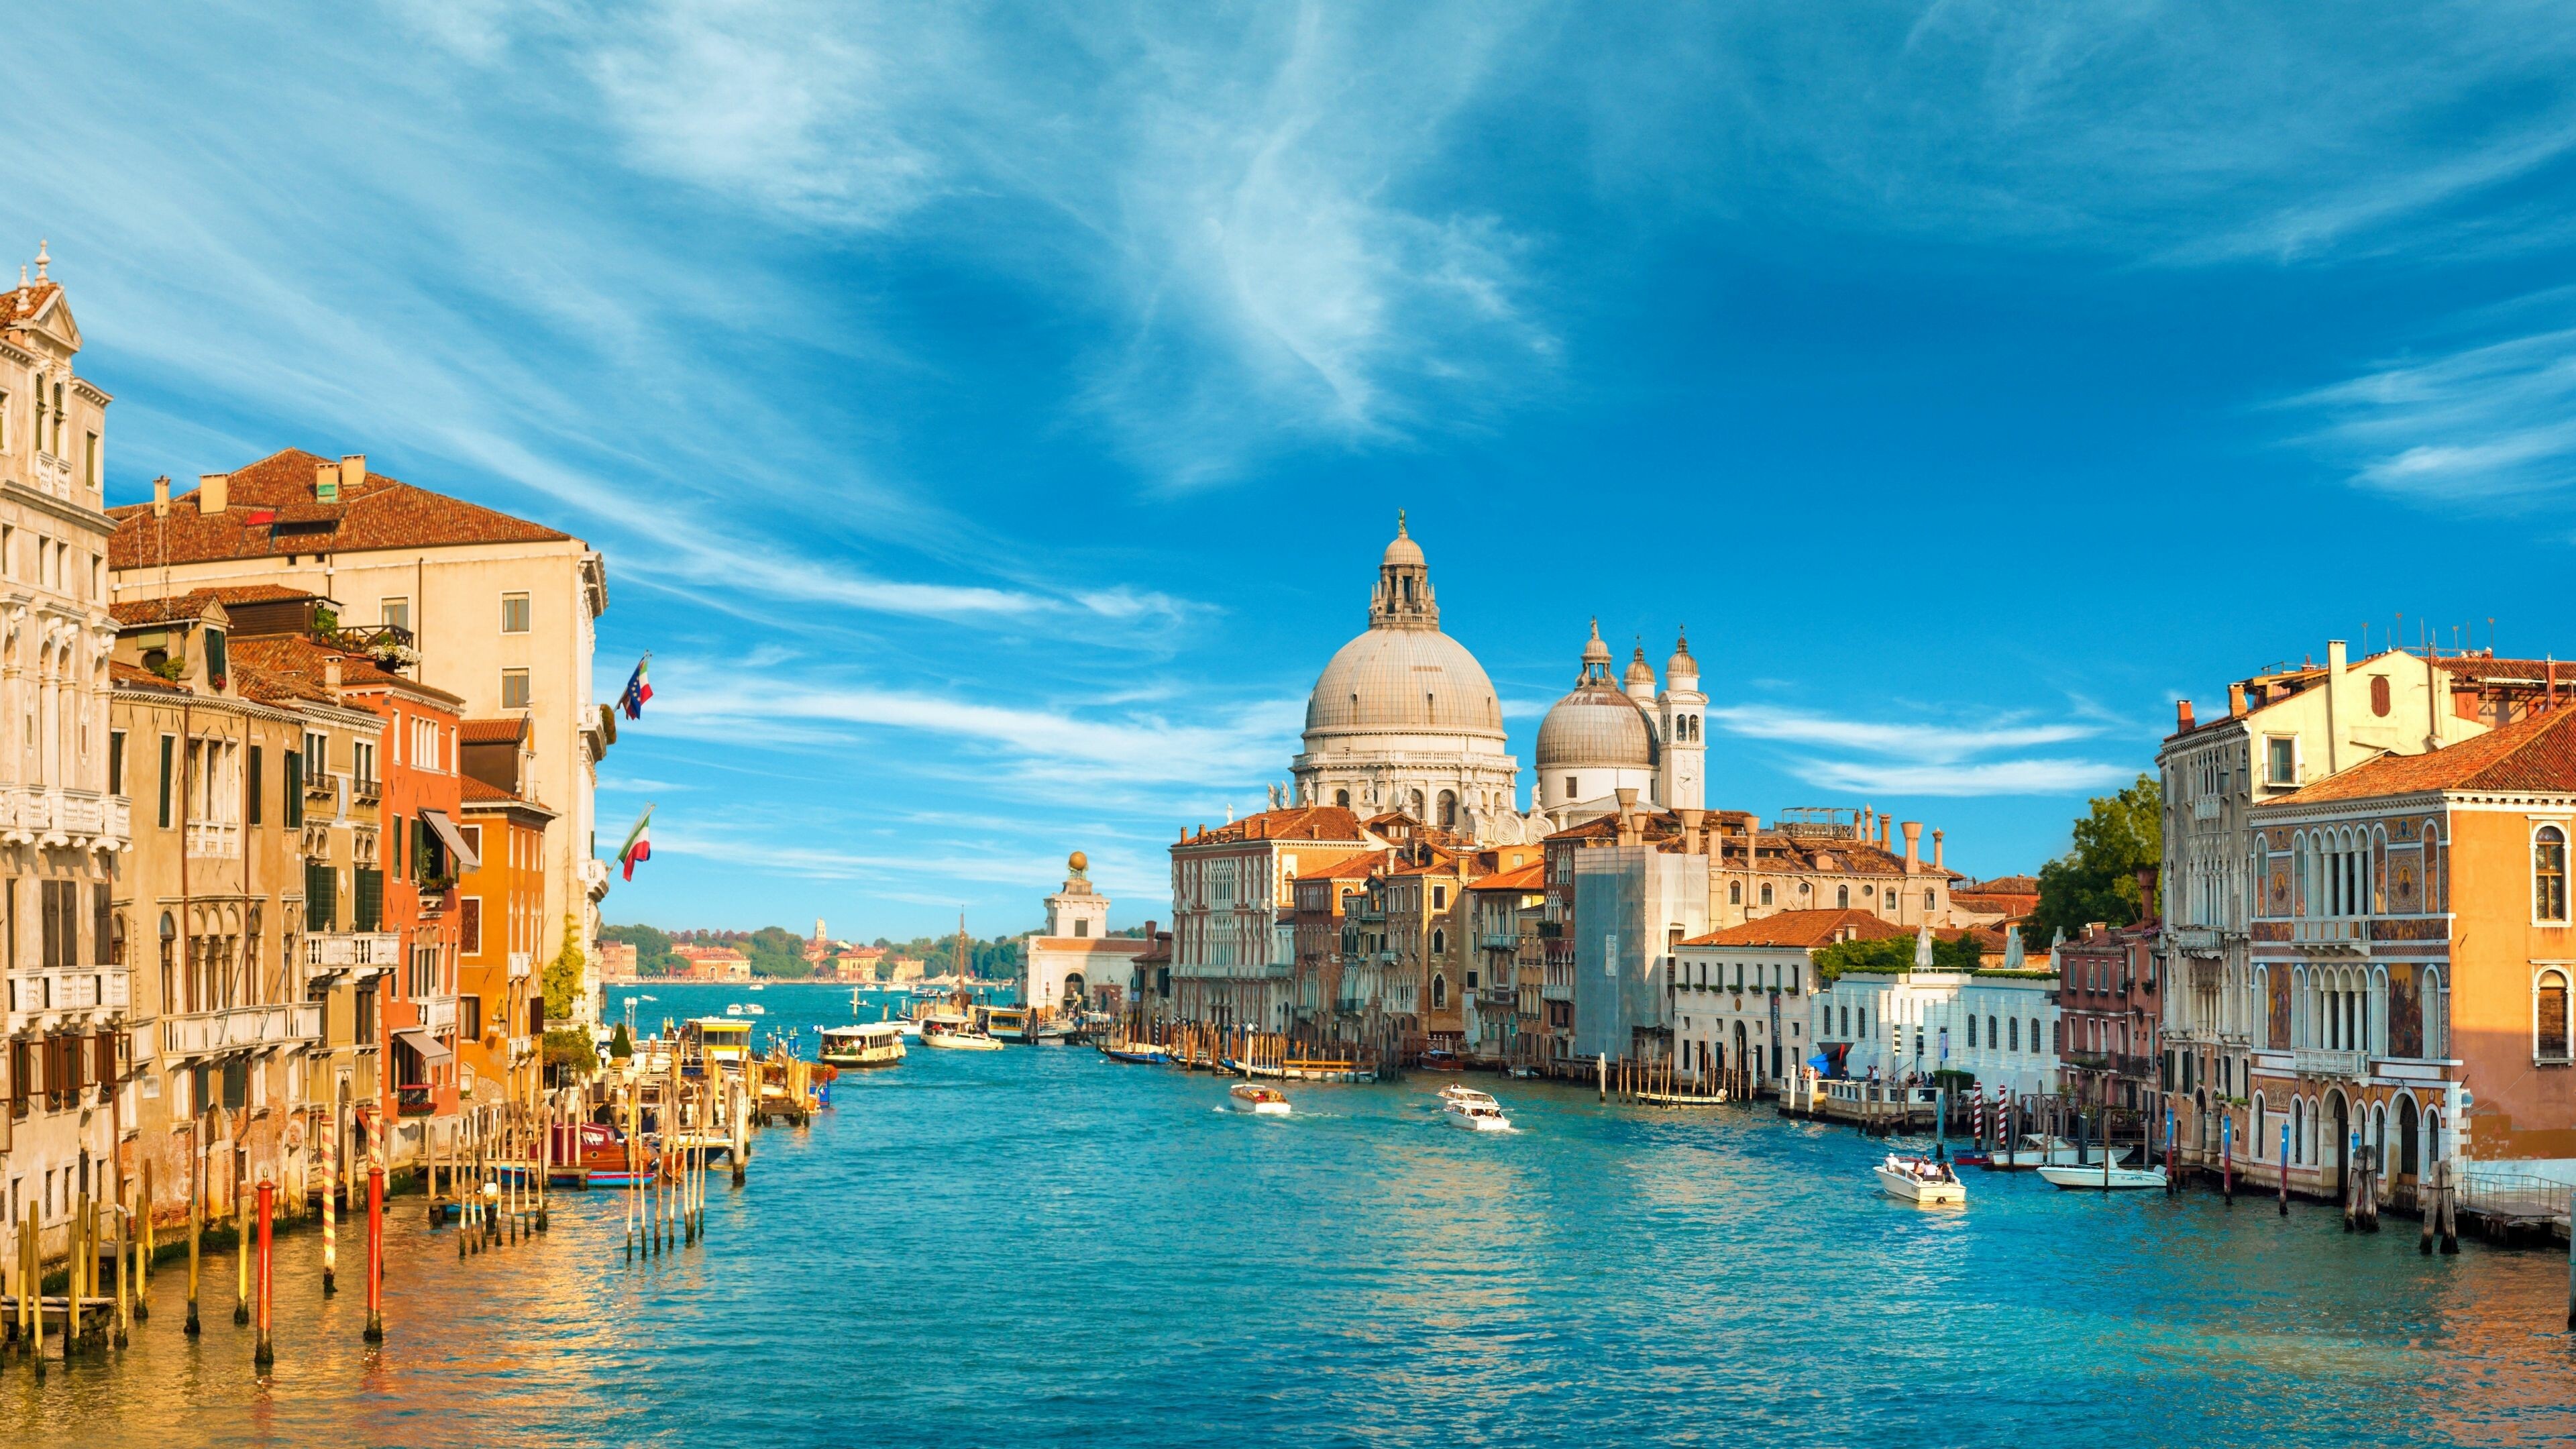 Italy: A country in Southern and Western Europe, Venice. 3840x2160 4K Wallpaper.